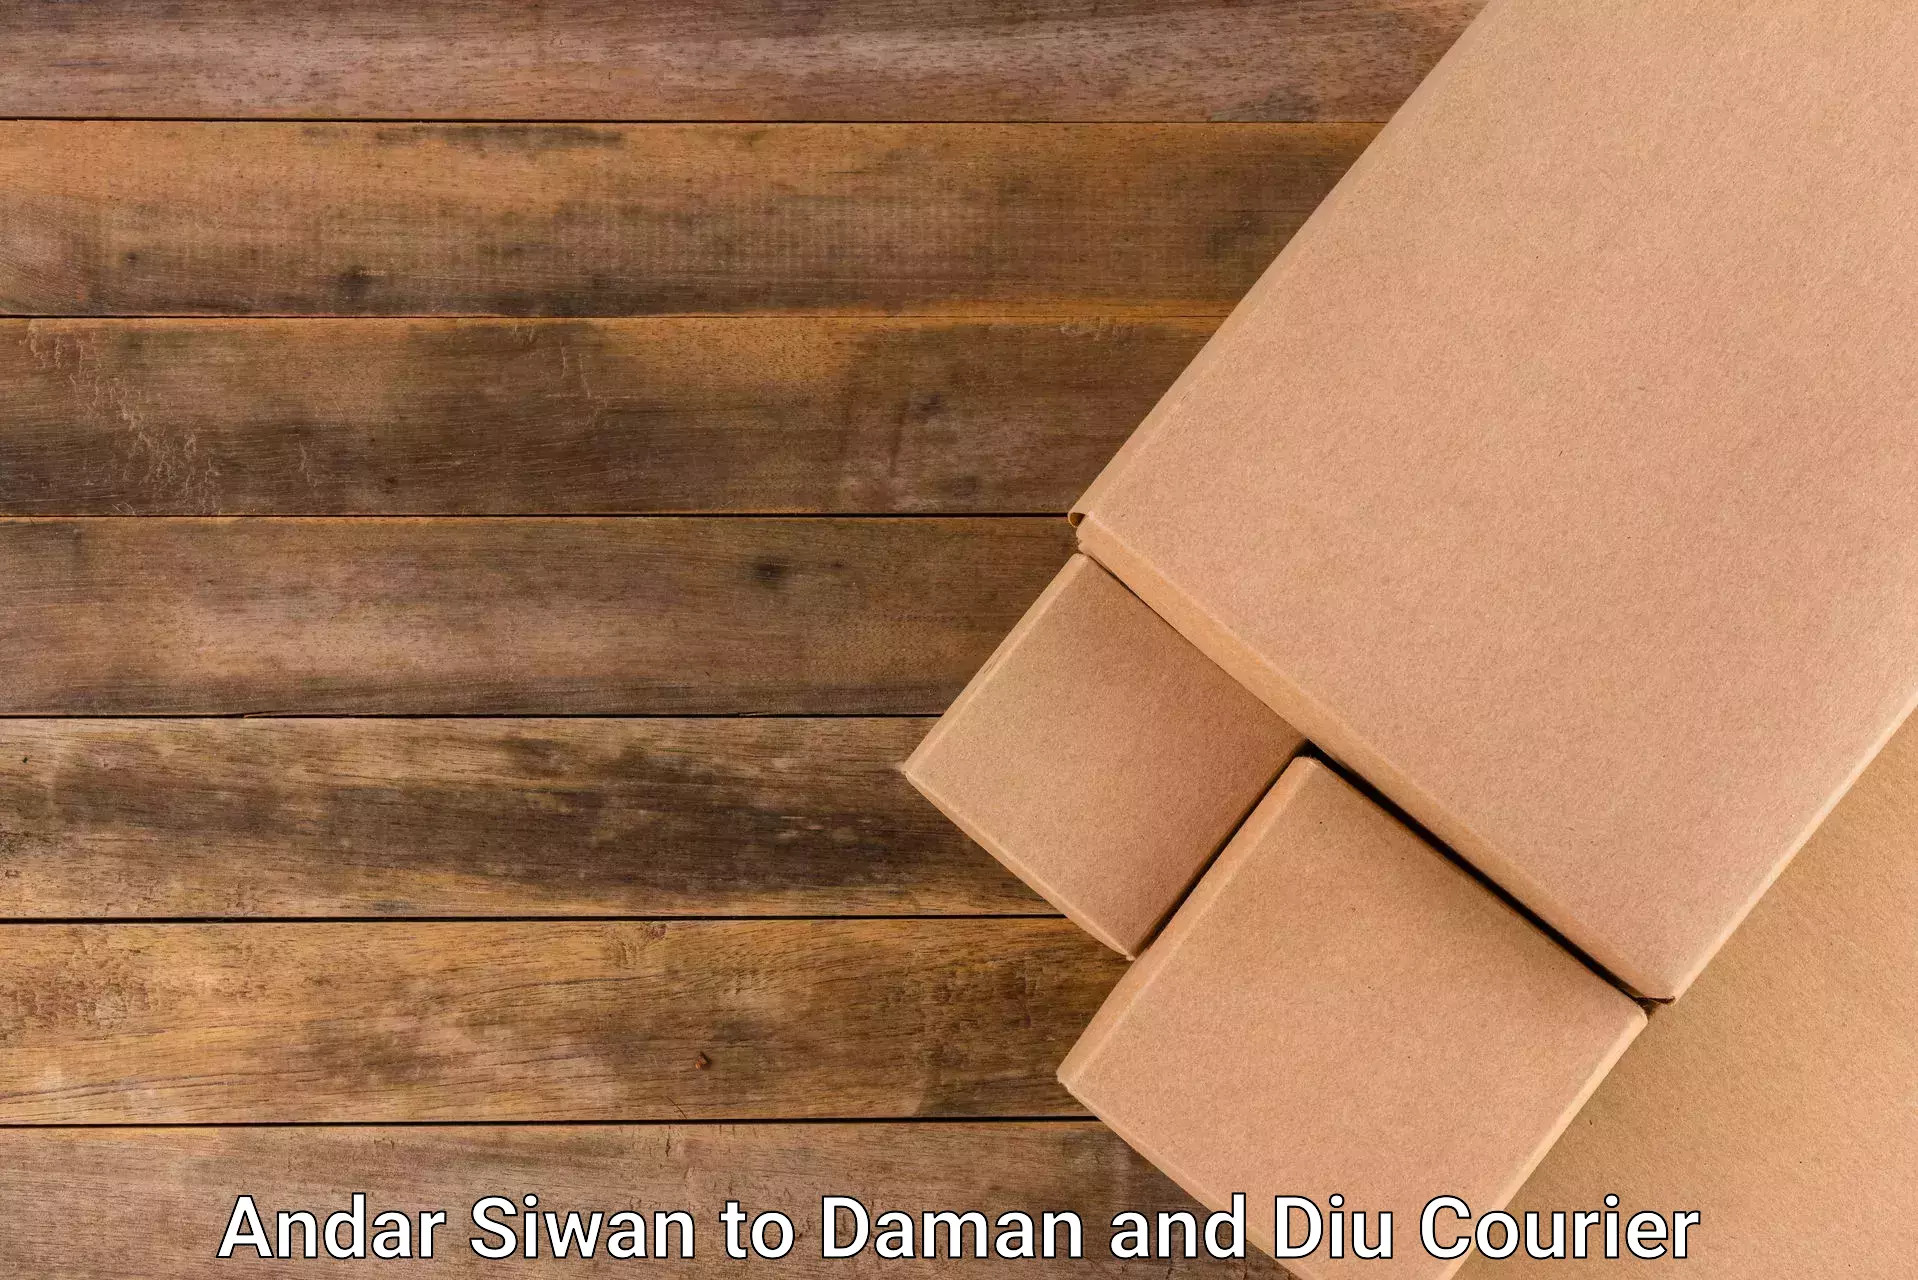 International courier networks Andar Siwan to Diu